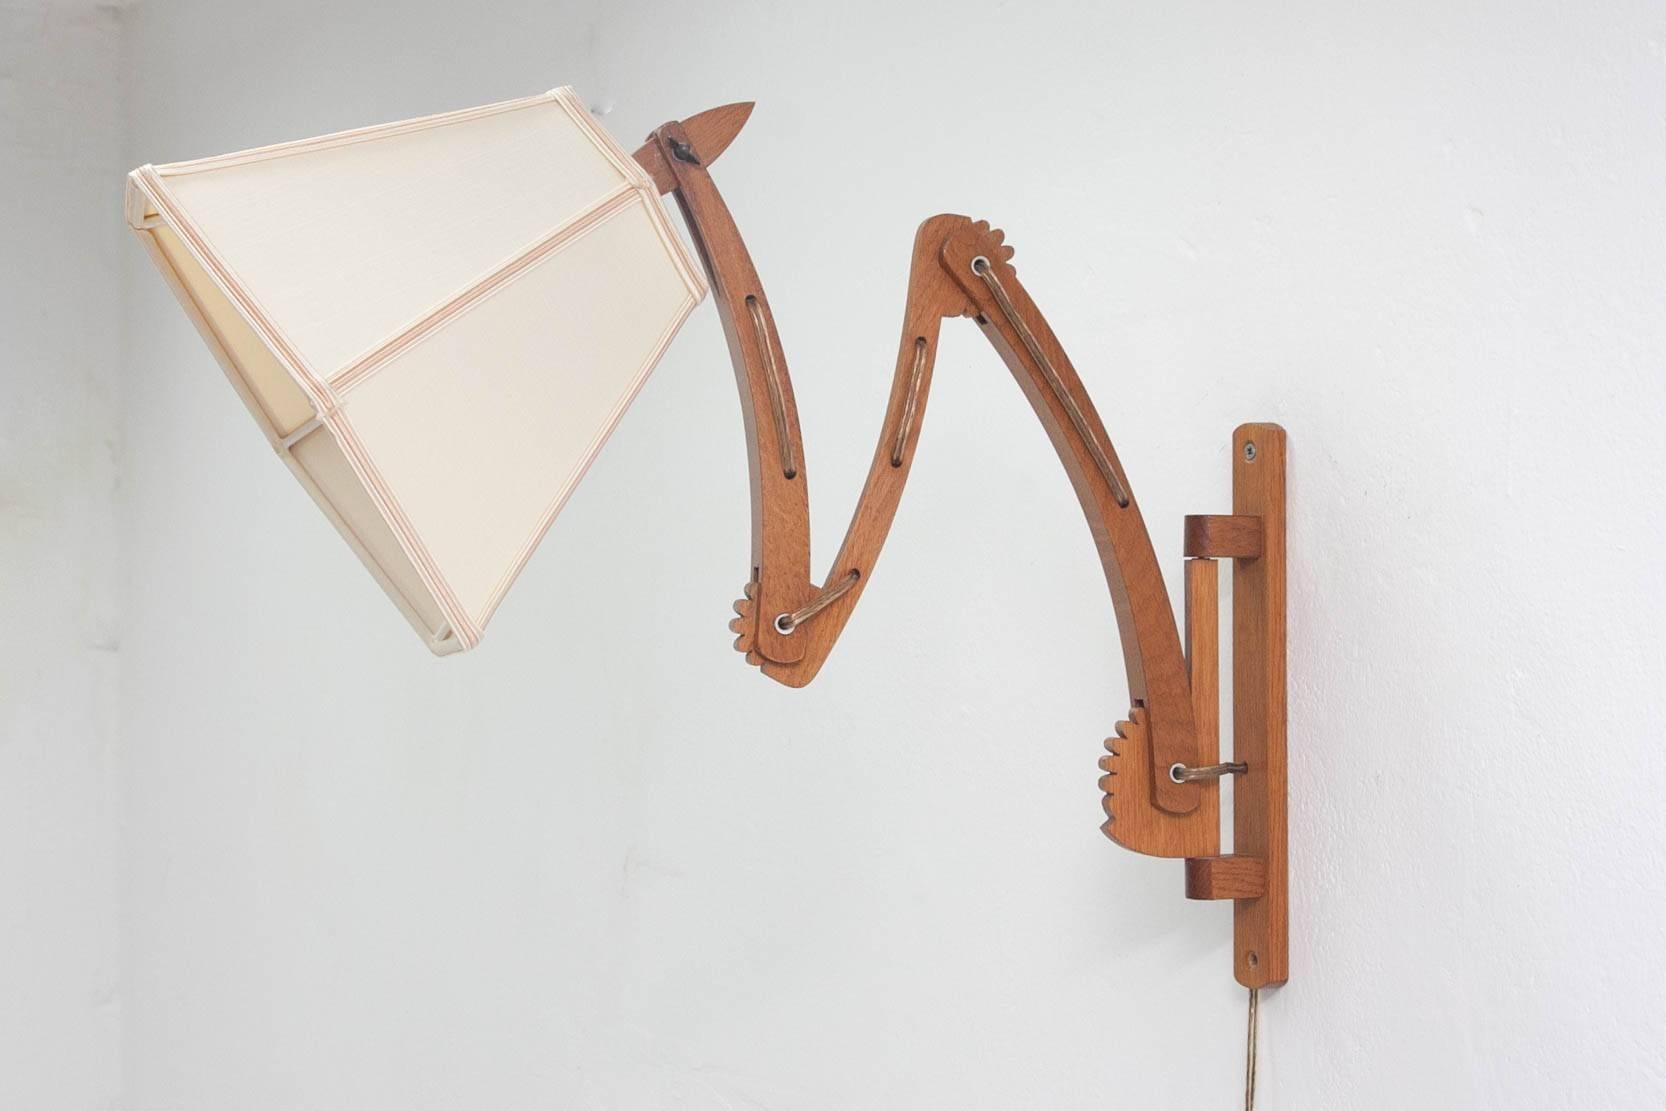 Quirky Dutch wall light from the 1950s incorporating a patented scissor system allowing the lamp to lock into almost any position imaginable using a ratcheting mechanism. Very nice functional lamp with an unusual look.